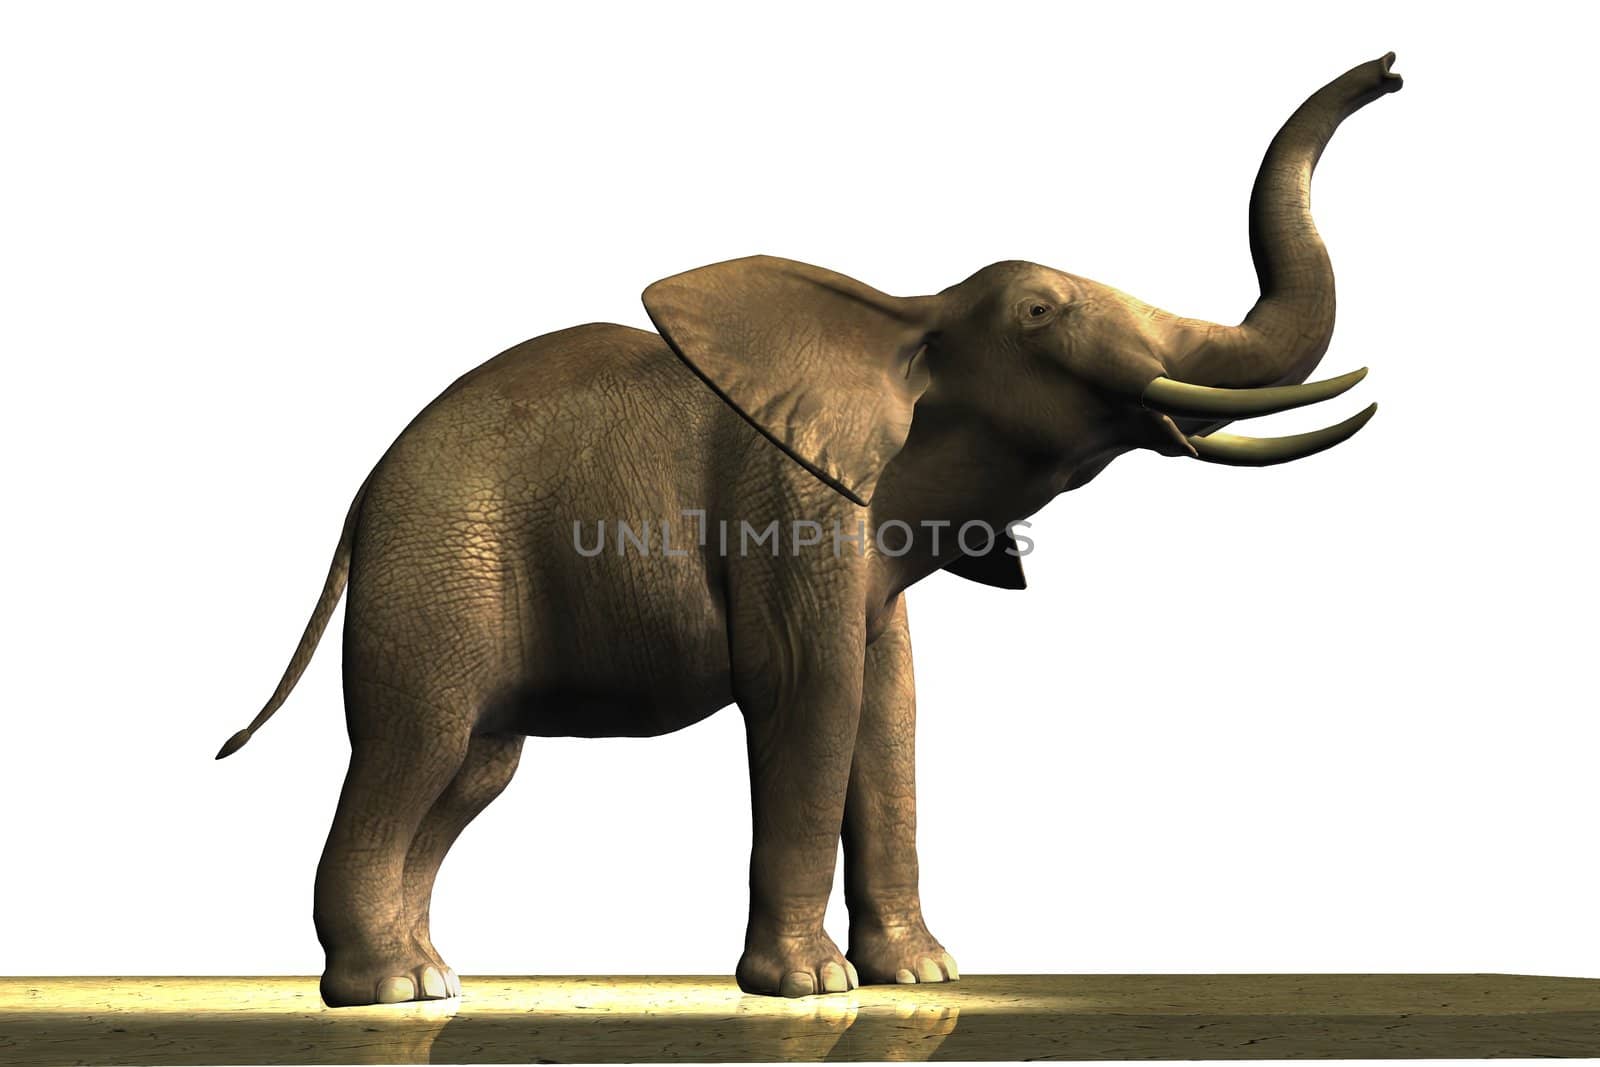 Male African elephant with ivory tusks.